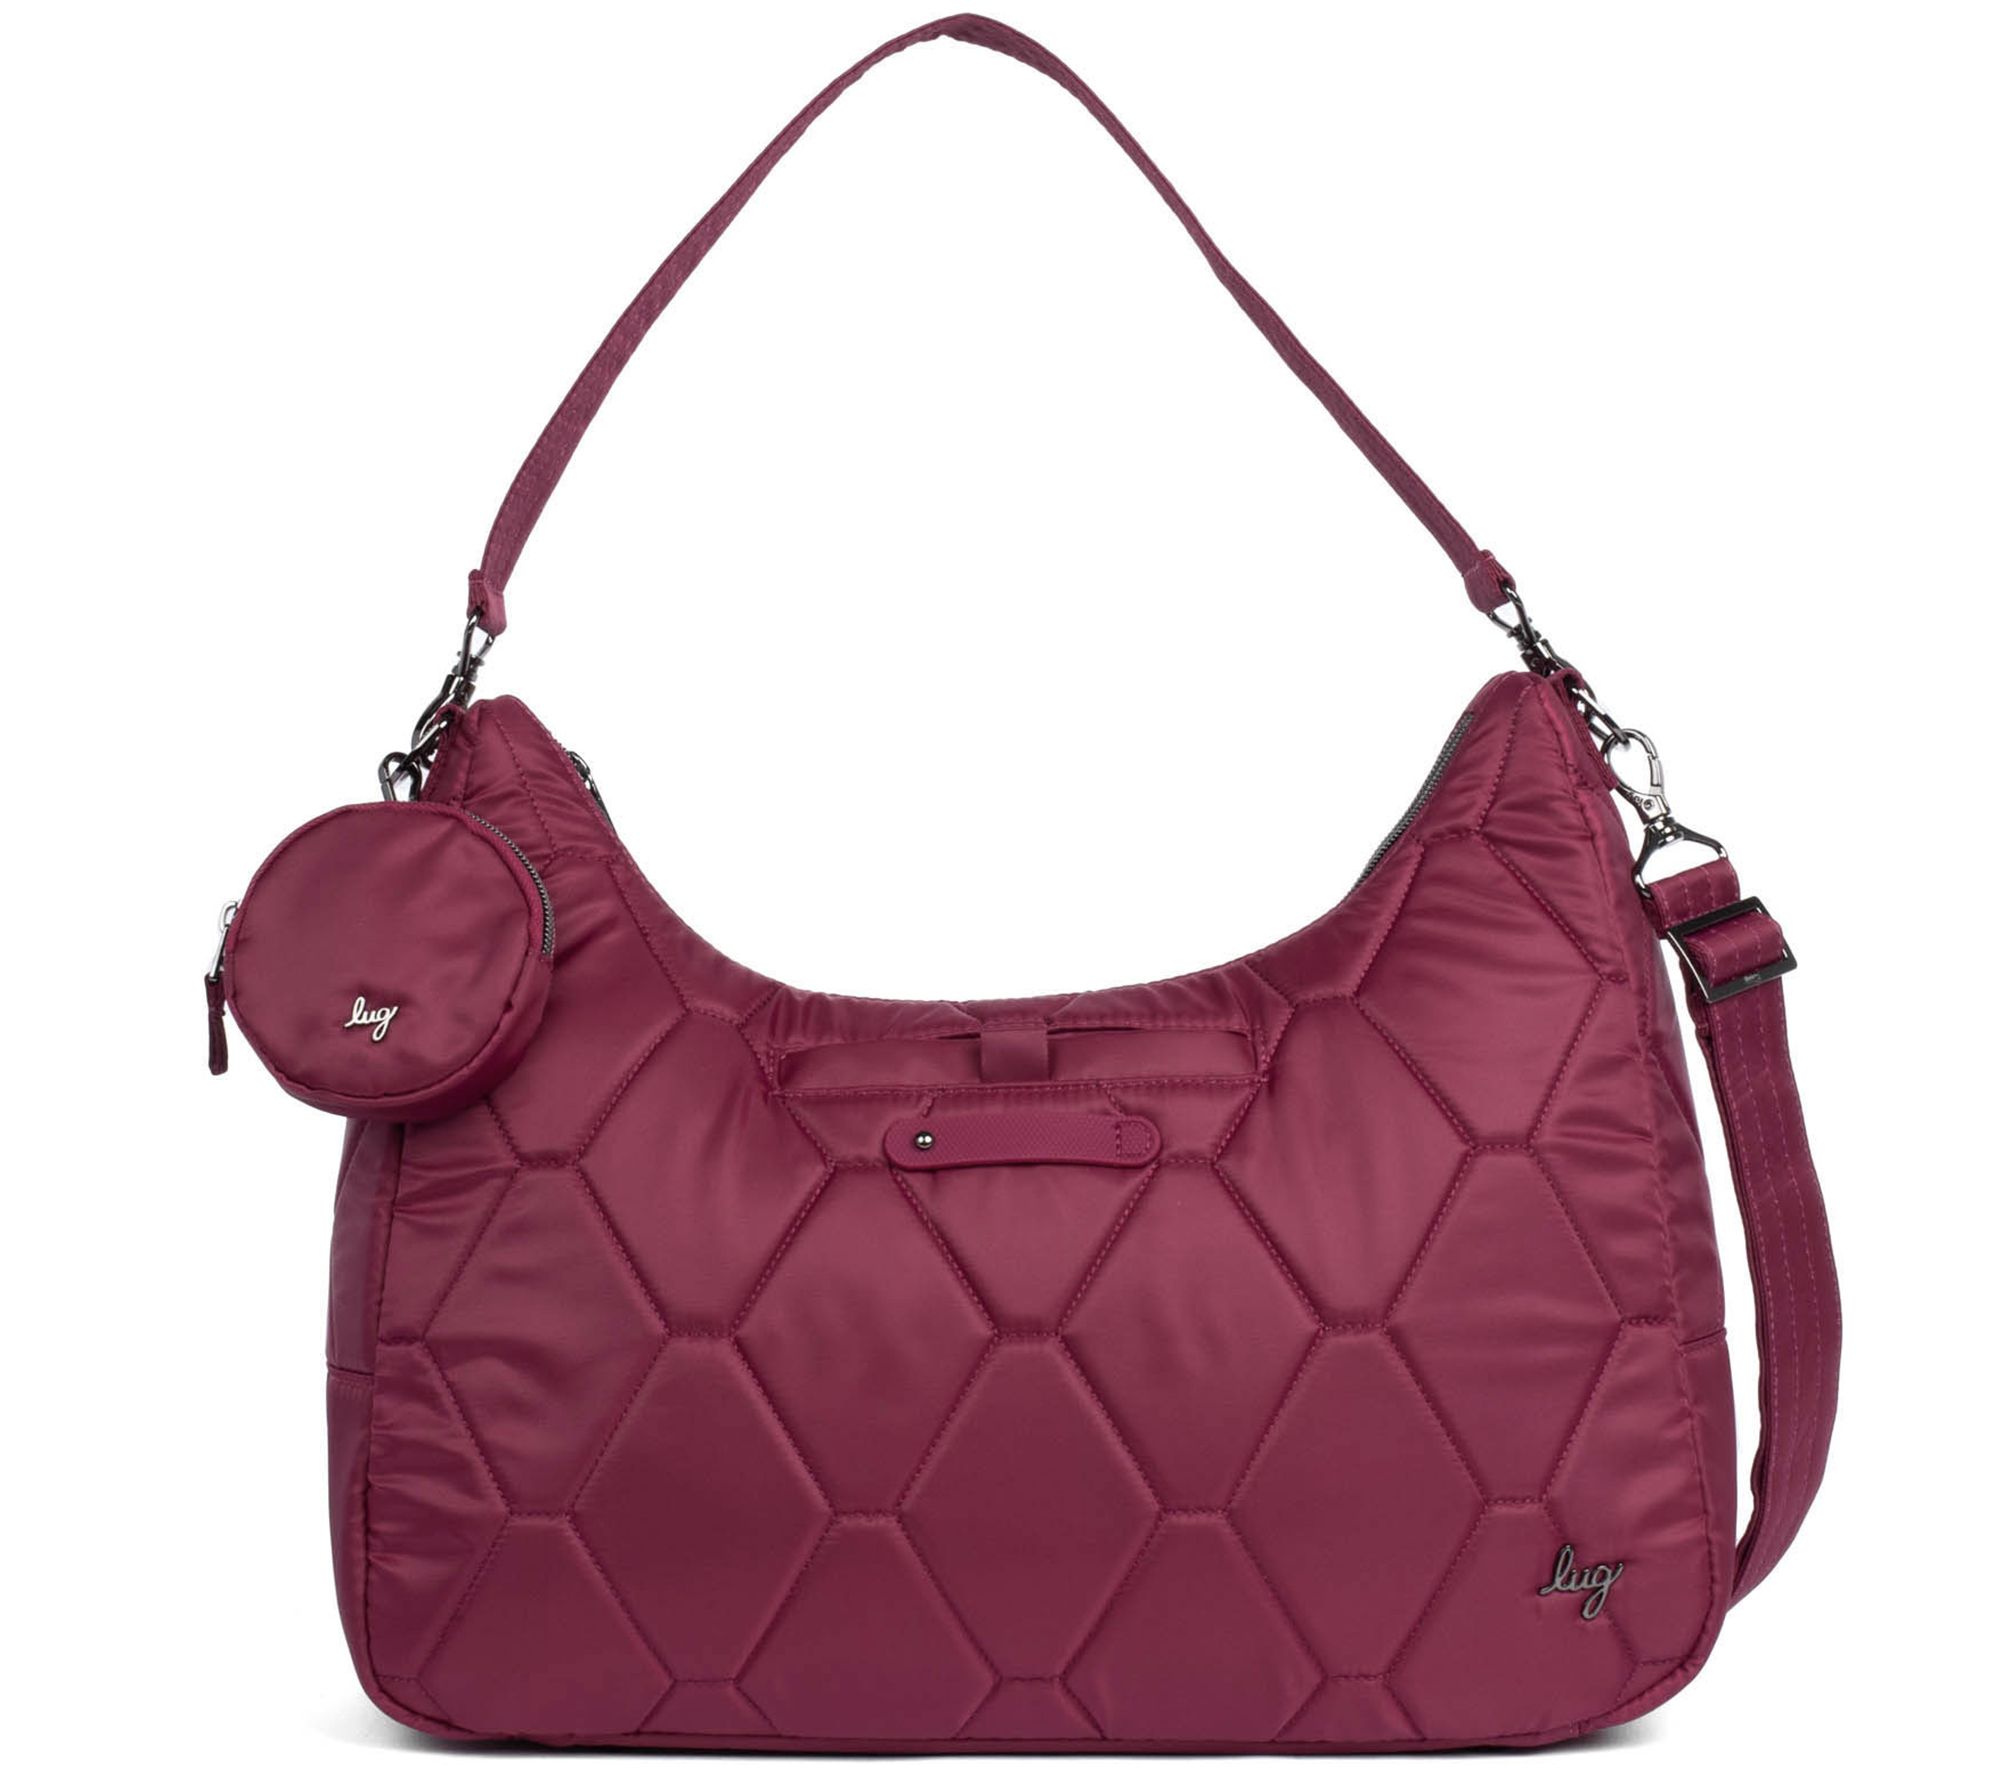 Save 75% Louis Vuitton Outlet Online US Store with Free Ship & No